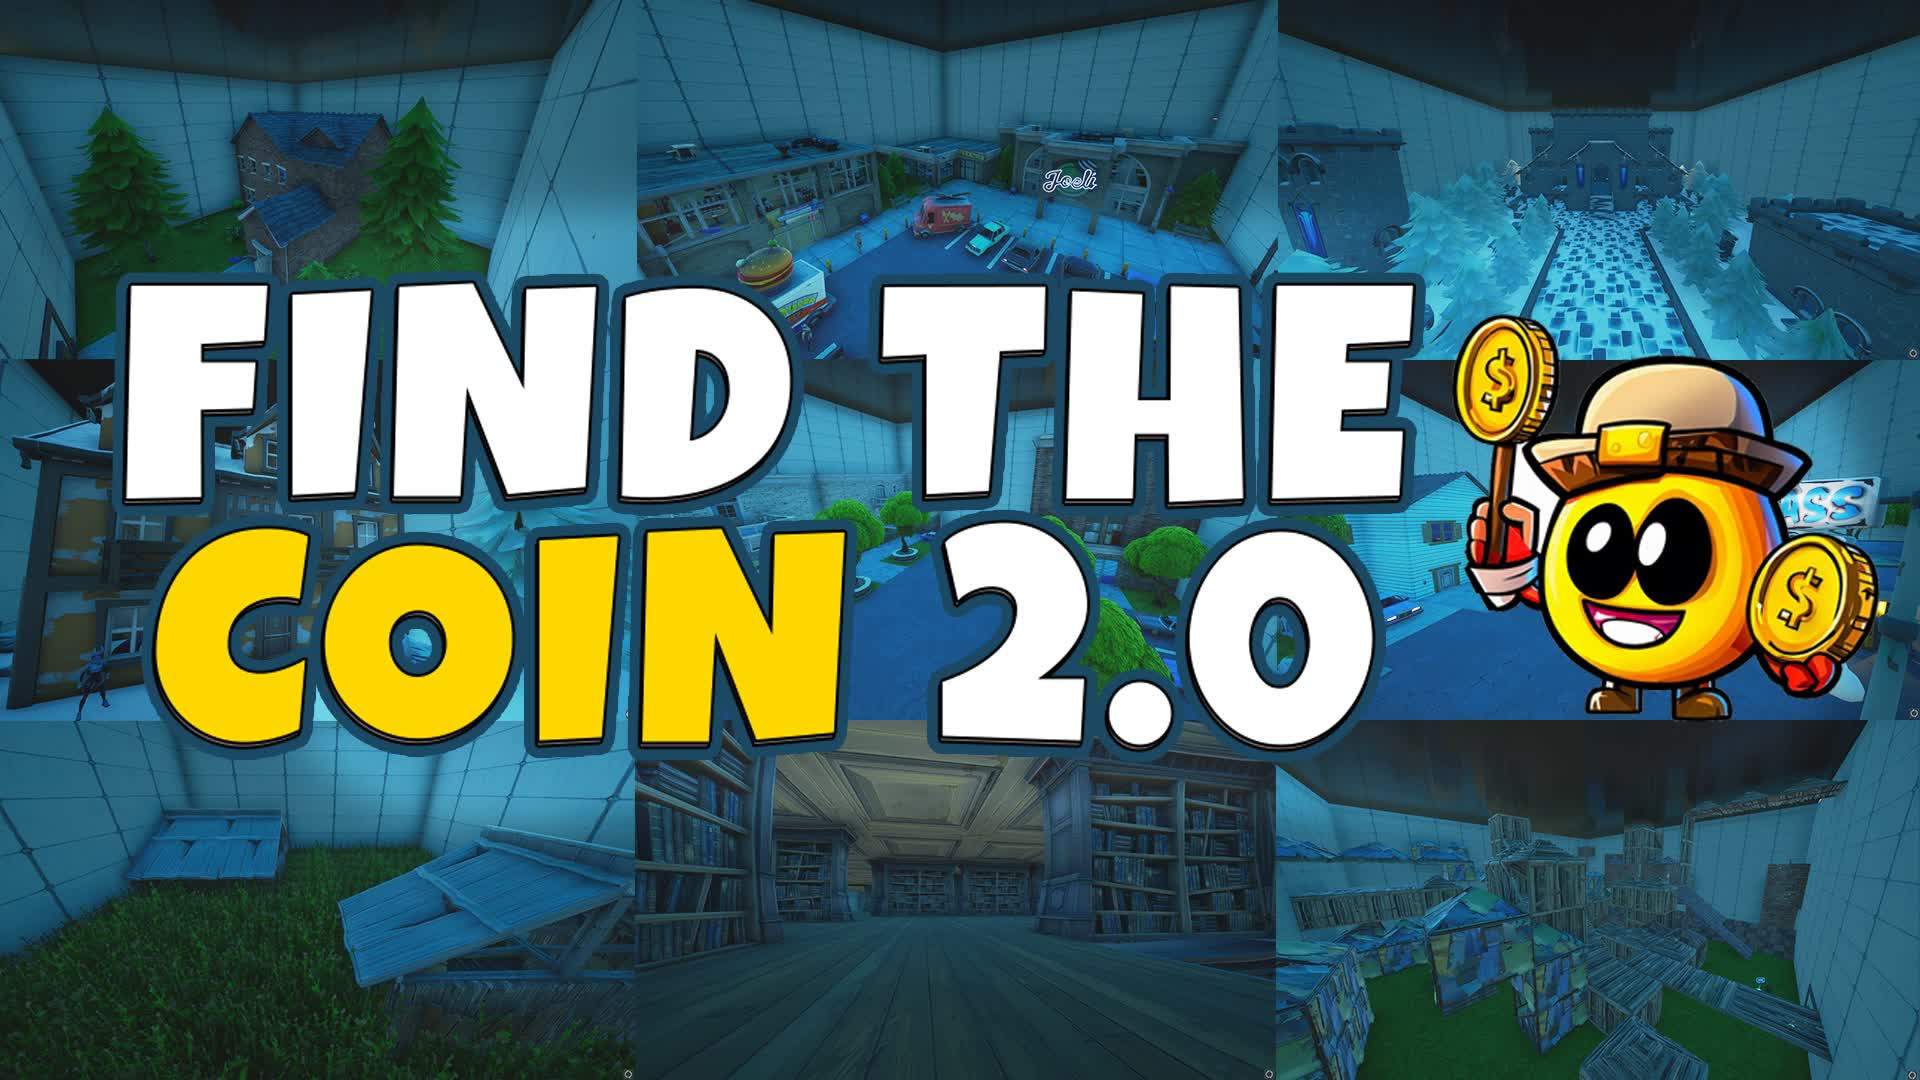 Find The Coin 2.0!